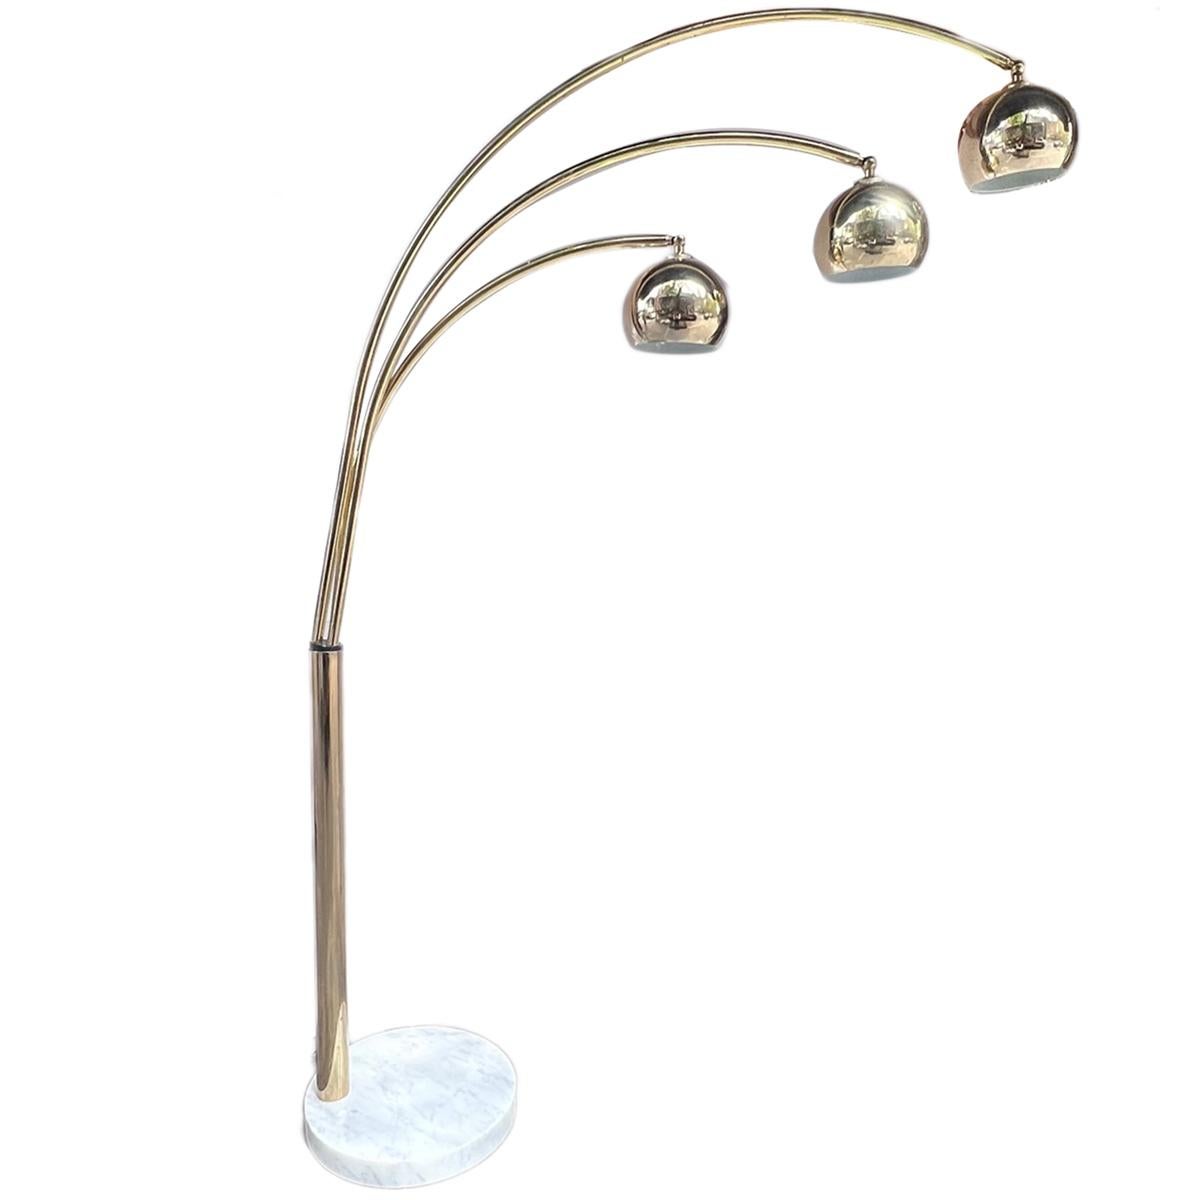 A circa 1960's Italian gilt floor lamp with 3 lights and marble base.

Measurements:
Height: 76.5